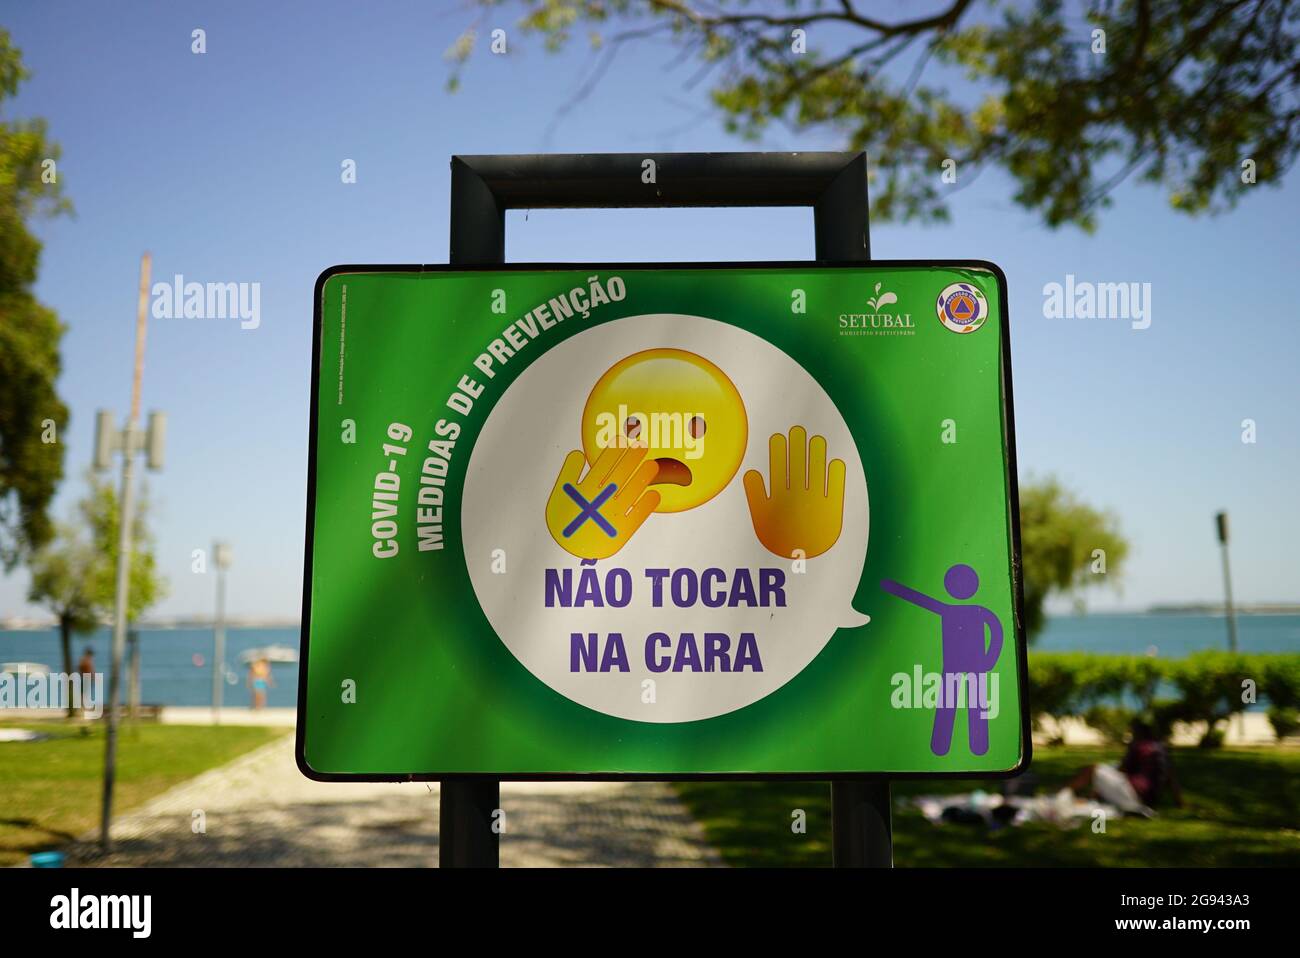 SETUBAL, PORTUGAL - Jul 04, 2021: A Portuguese sign with Covid 19 prevention measures saying "Don't touch your face" Stock Photo